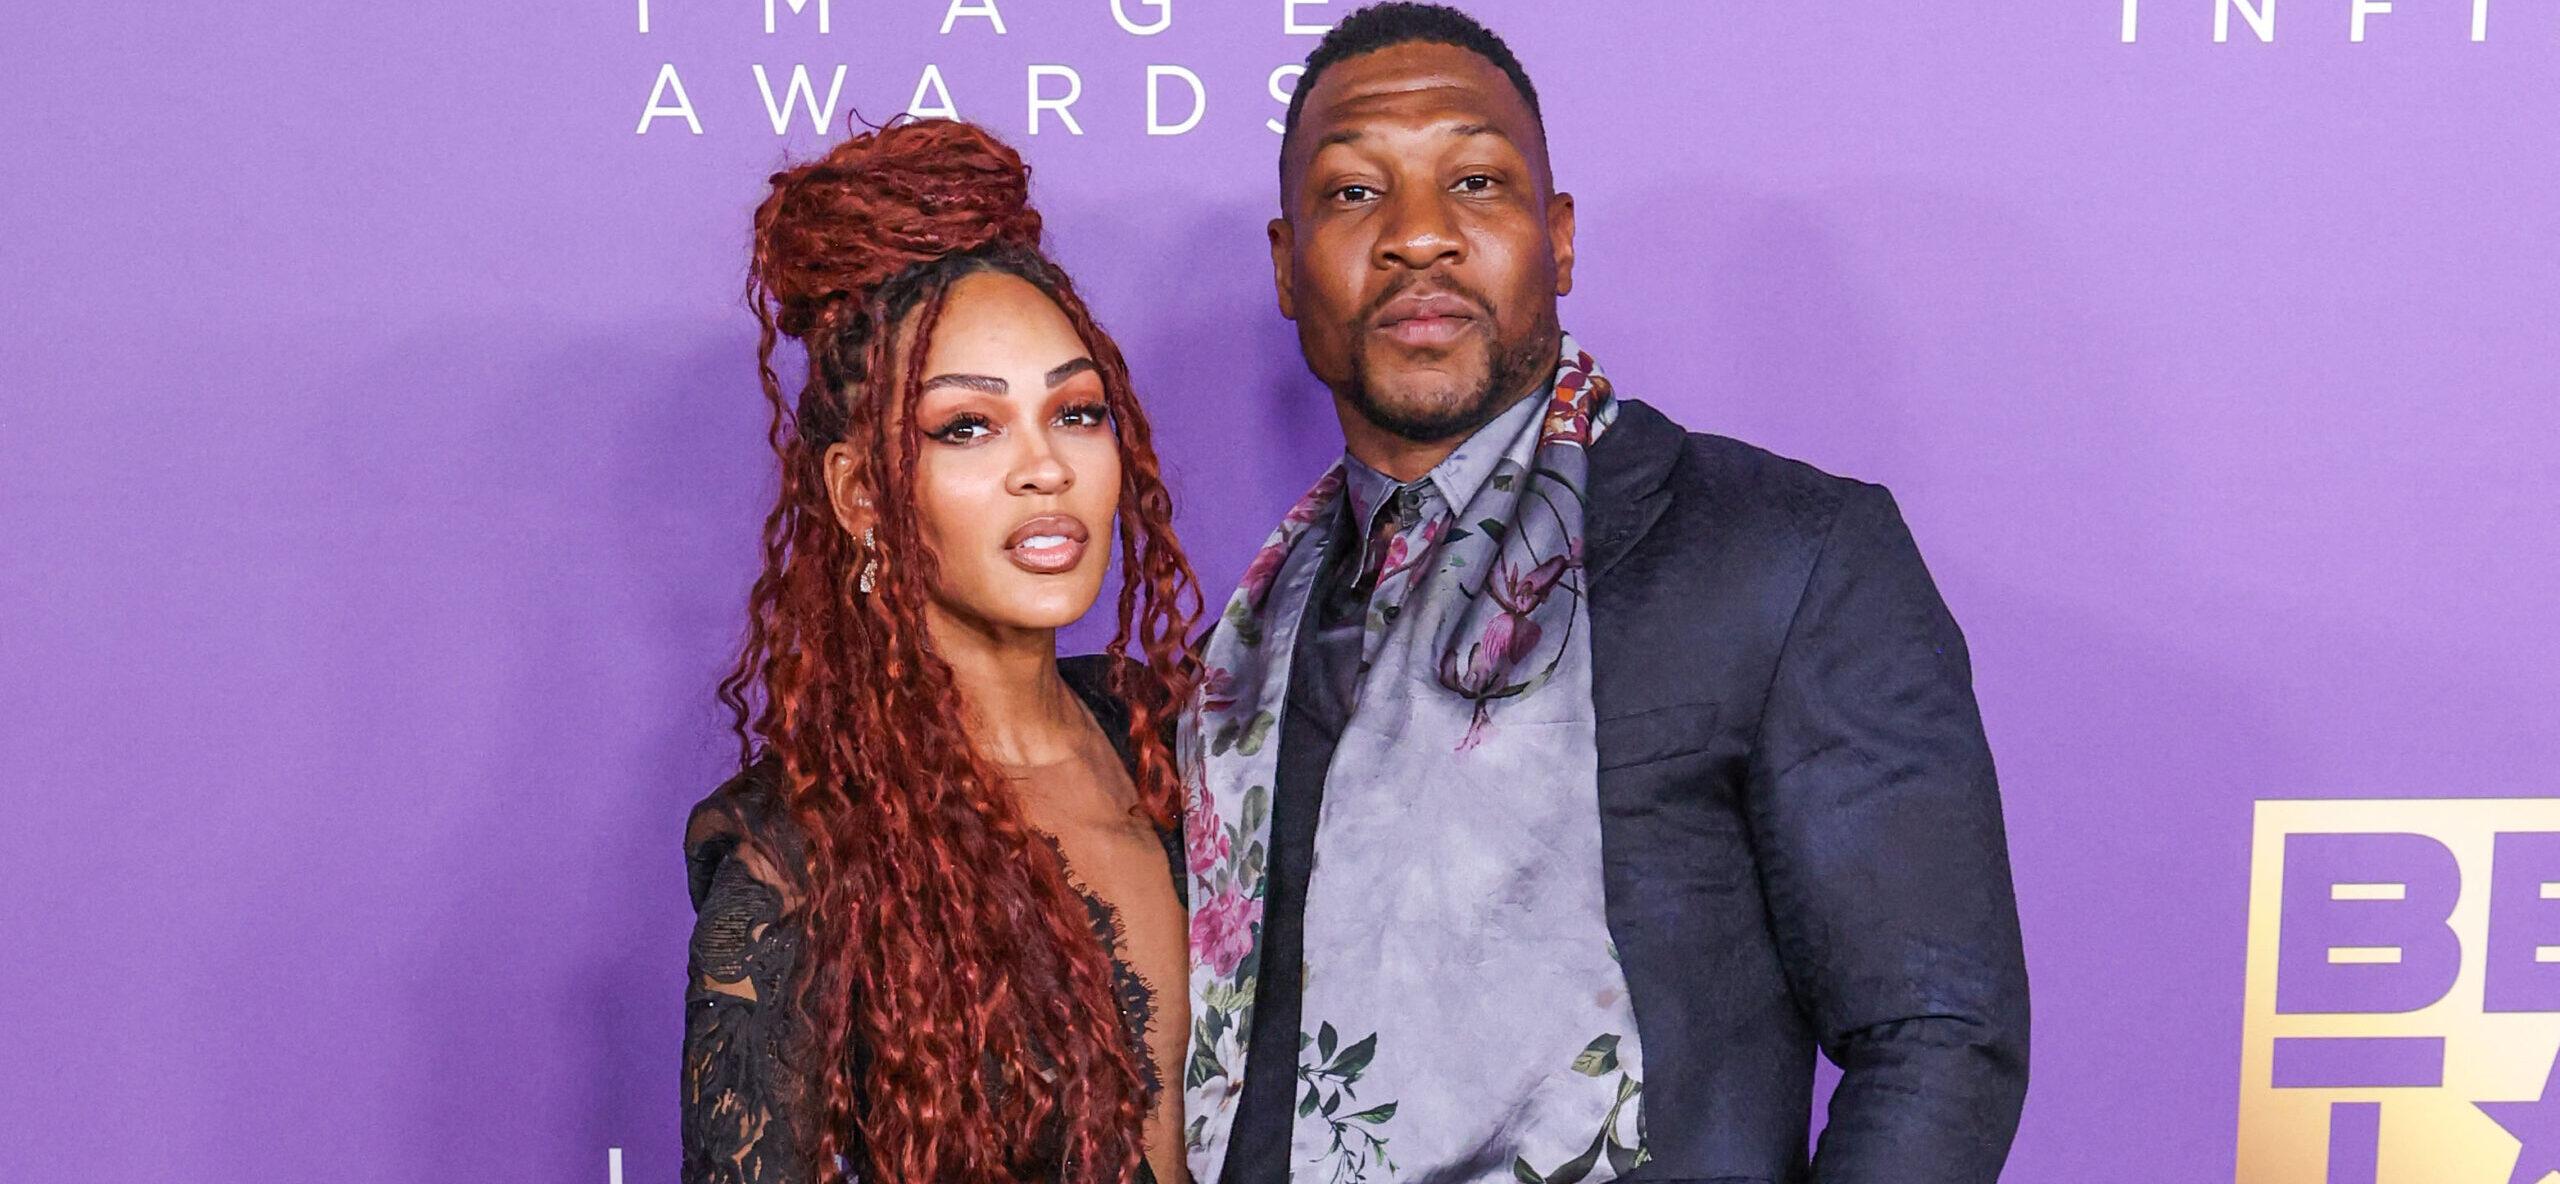 Jonathan Majors’ GF Meagan Good Reveals How She Has Coped With His Legal Crisis